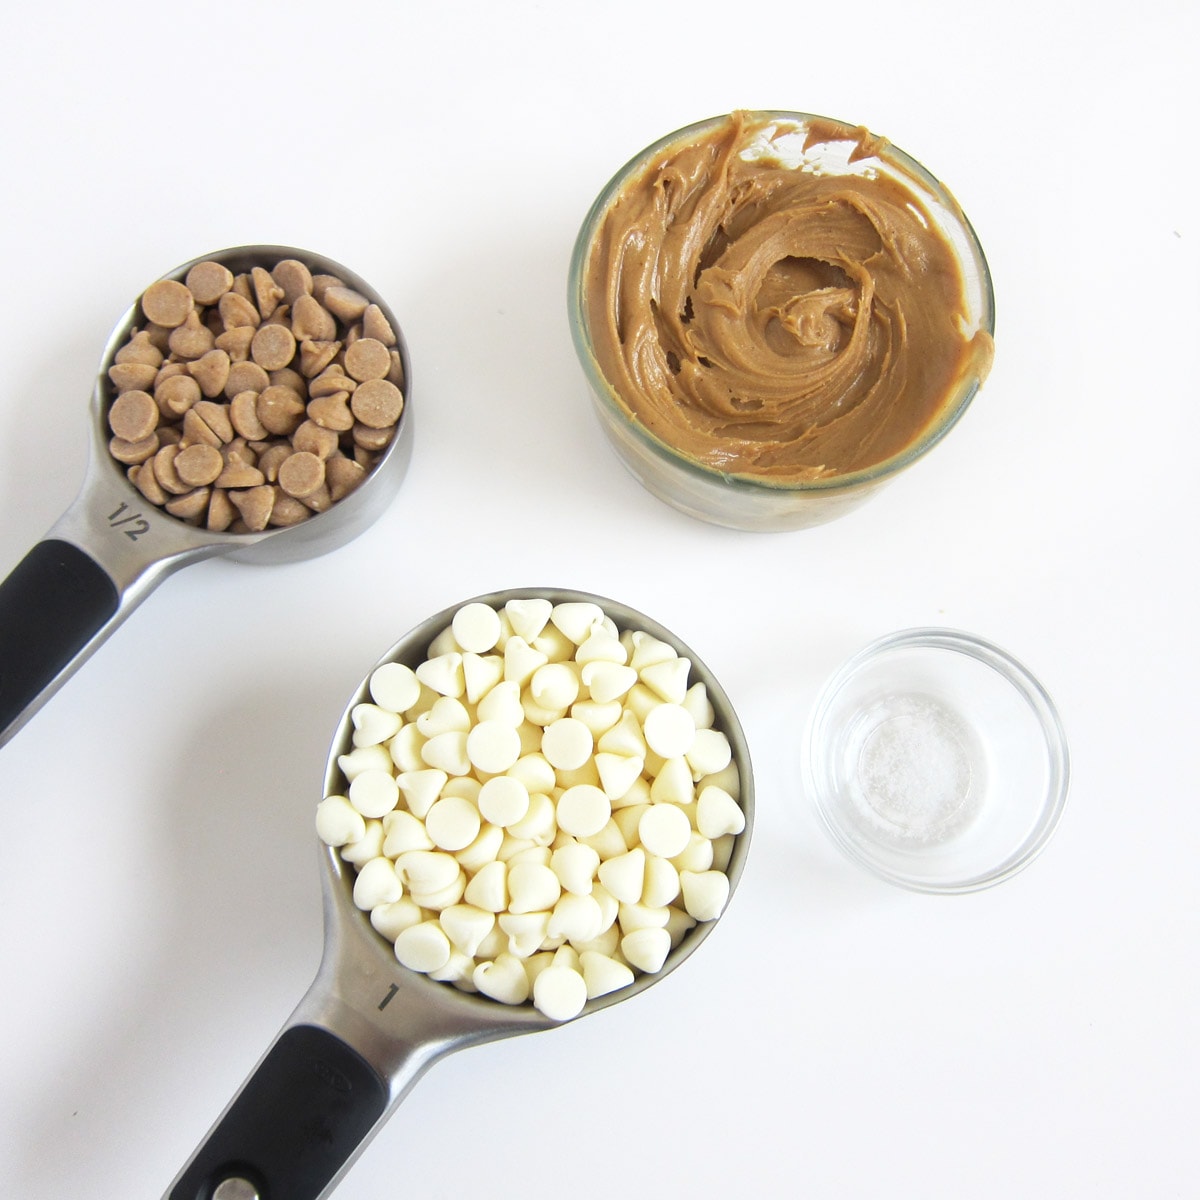 1 cup white chips, ½ cup peanut butter chips, bowl of peanut butter, and a tiny bowl of salt.